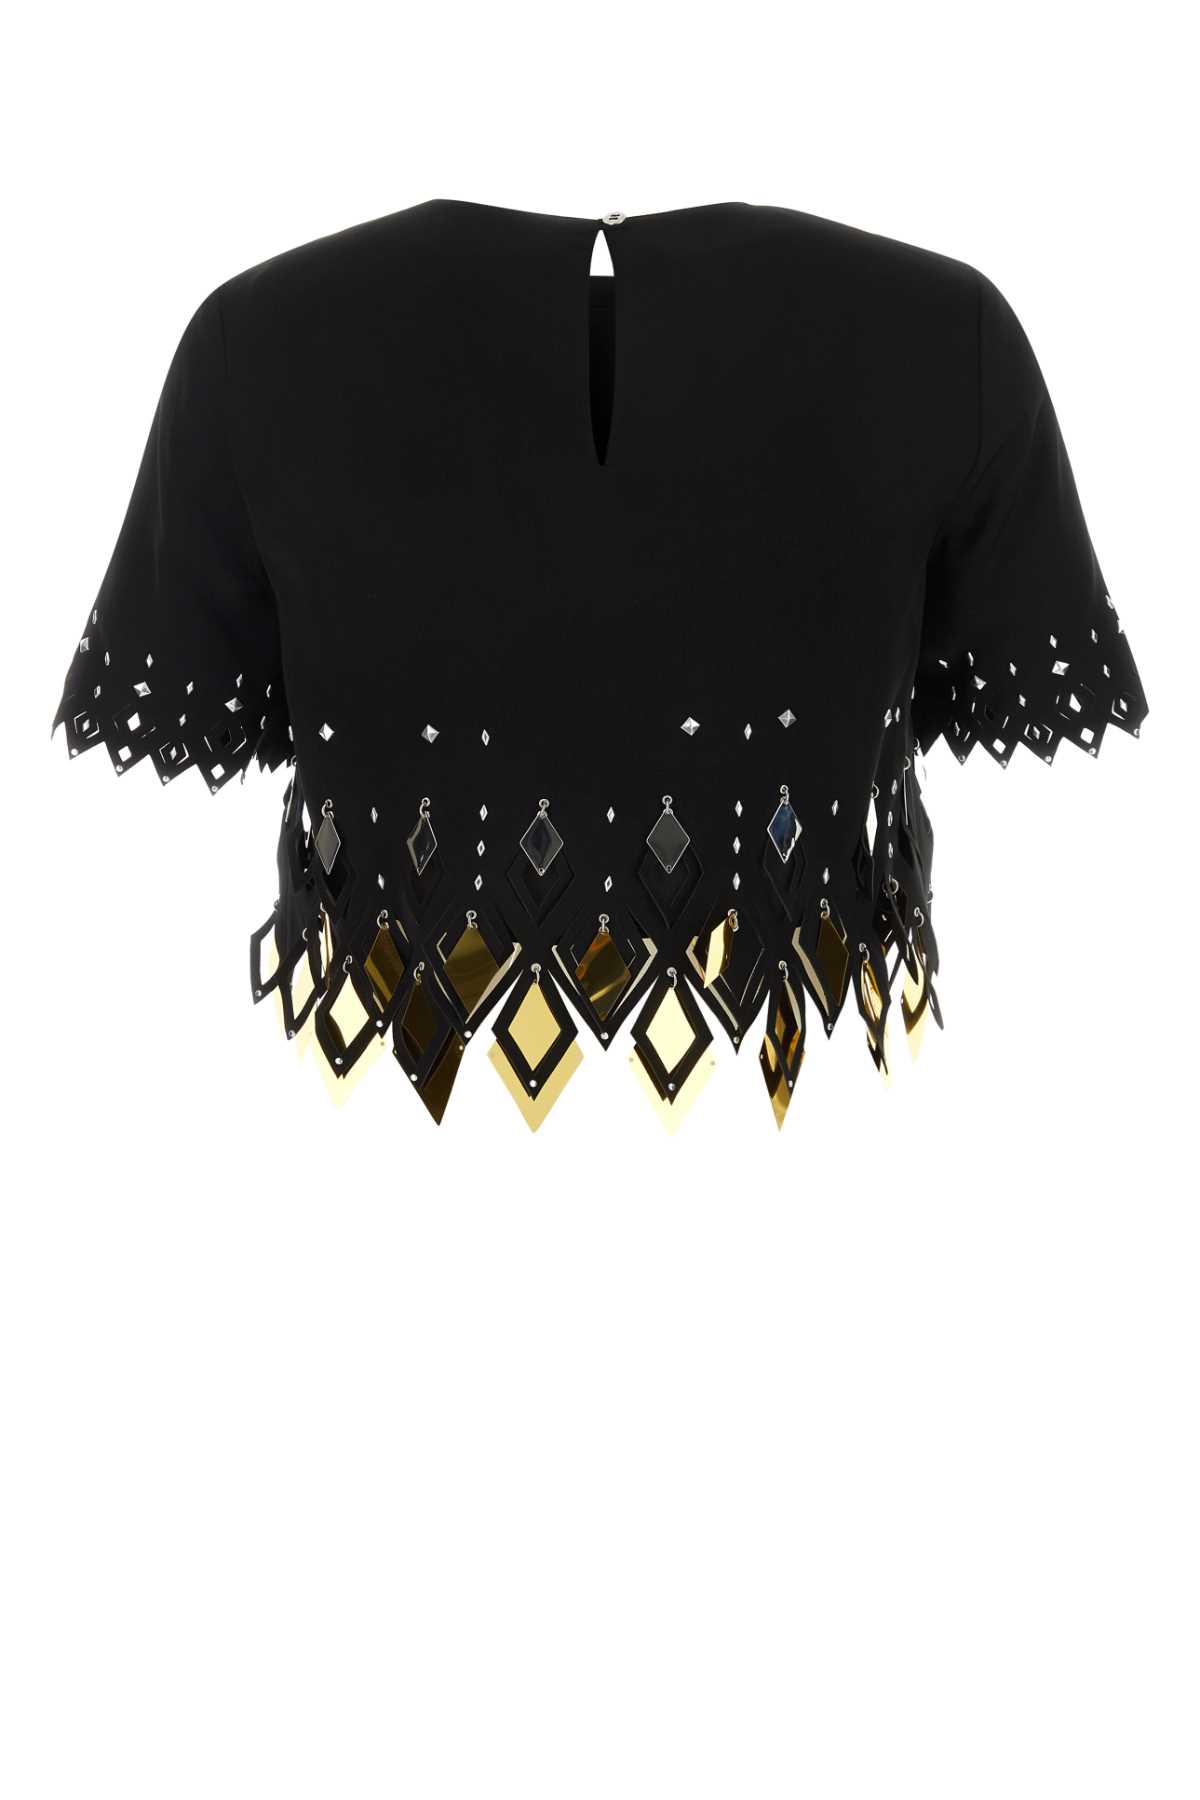 Paco Rabanne Black Polyester Top